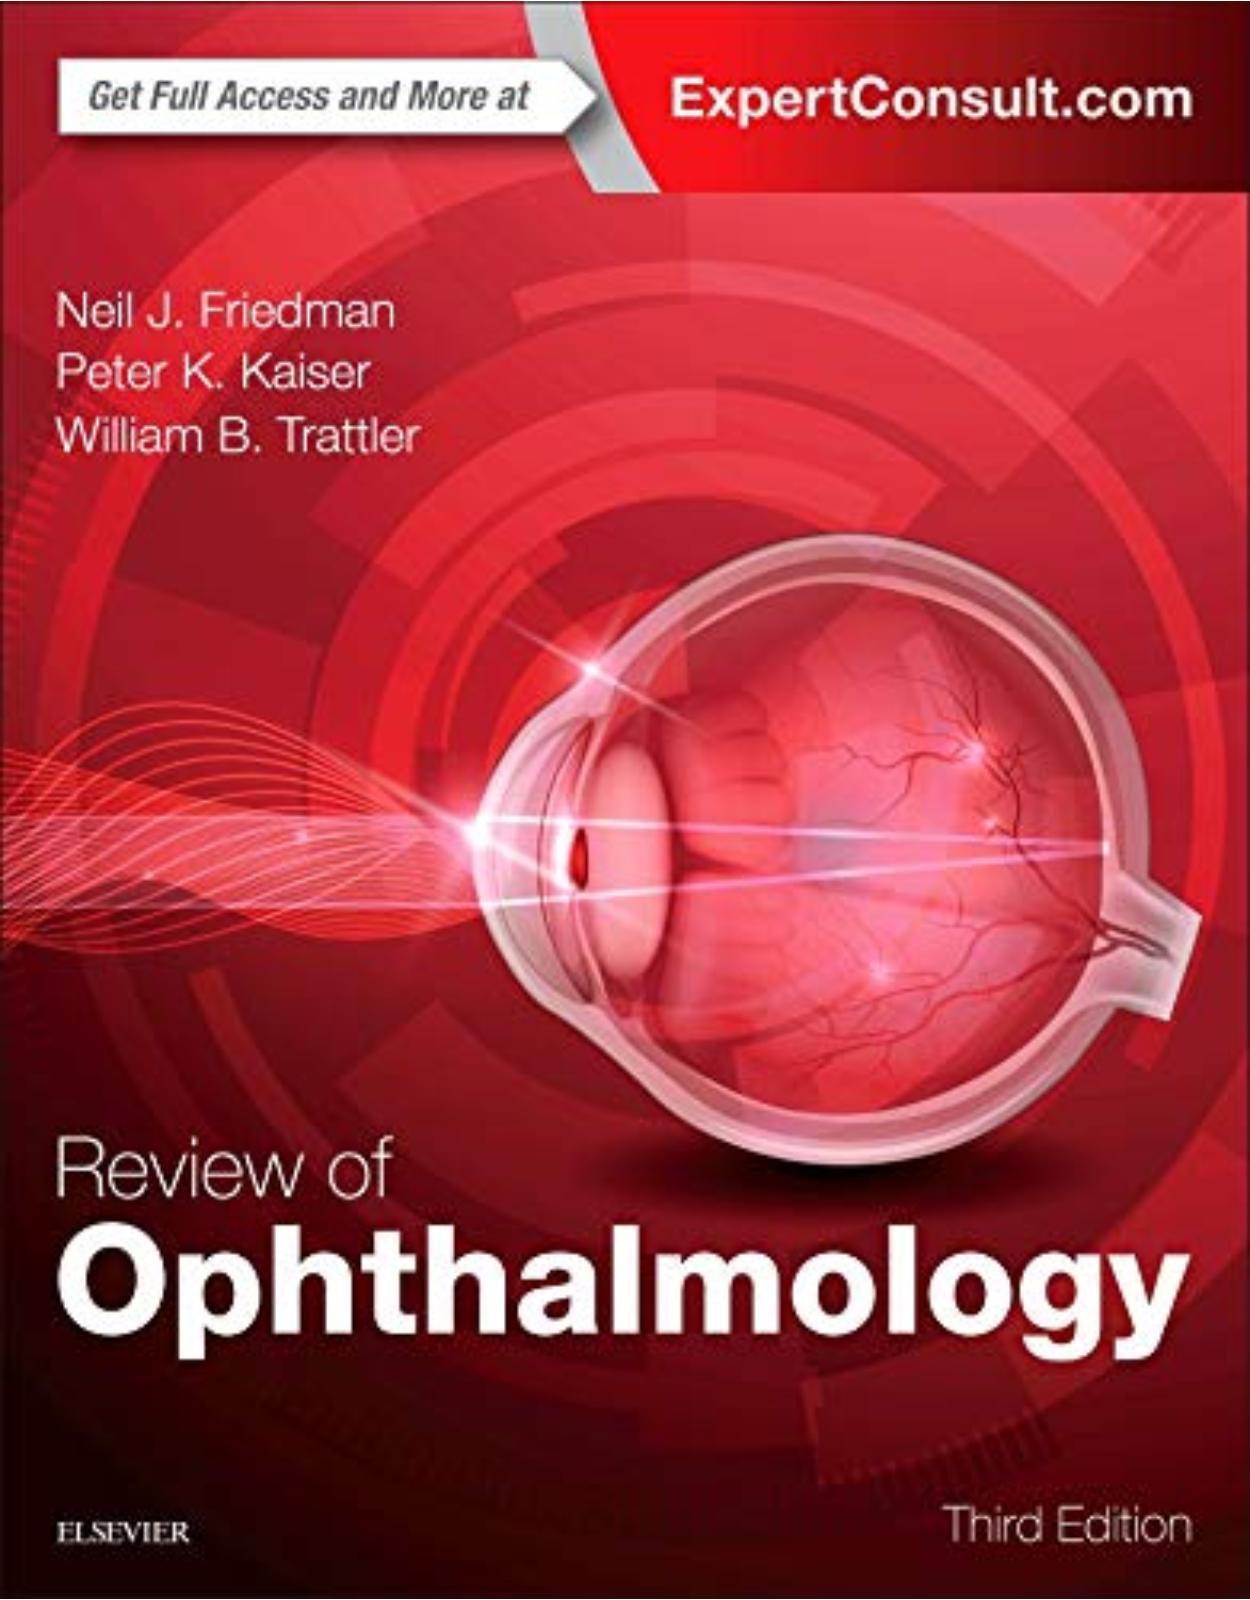 Review of Ophthalmology, 3e 